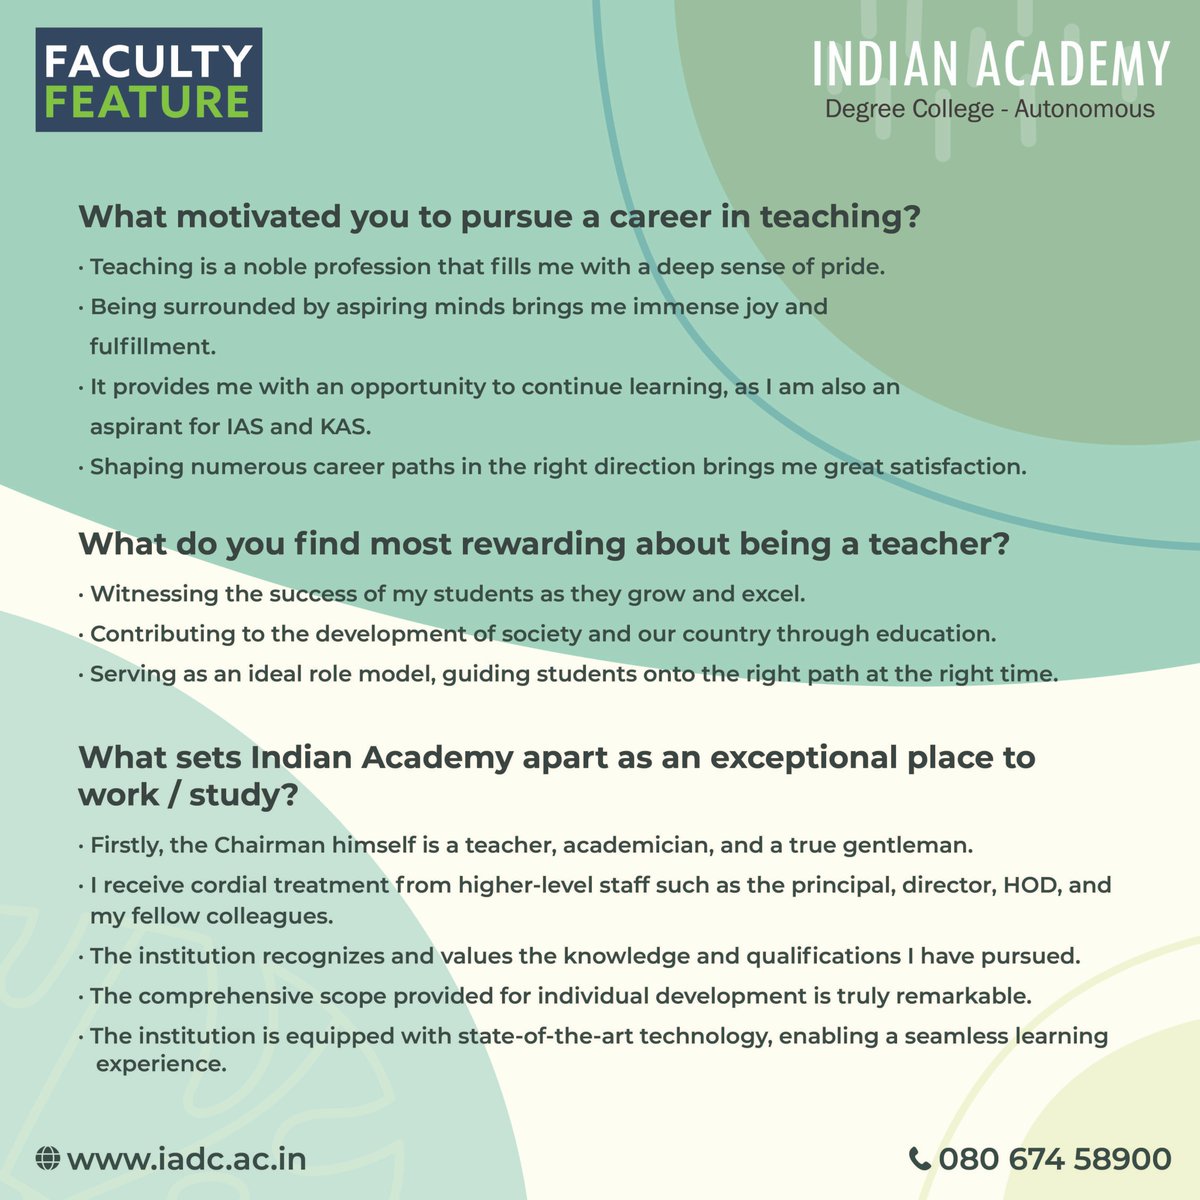 The best teachers are those who show you where to look but don't tell you what to see.' - Alexandra K. Trenfor
This month on  #facultyfeature, we celebrate Prof. Banu Prakash.

#facultylife #facultydevelopment #teacherstips #professorlife #facultysupport #educationalleadership